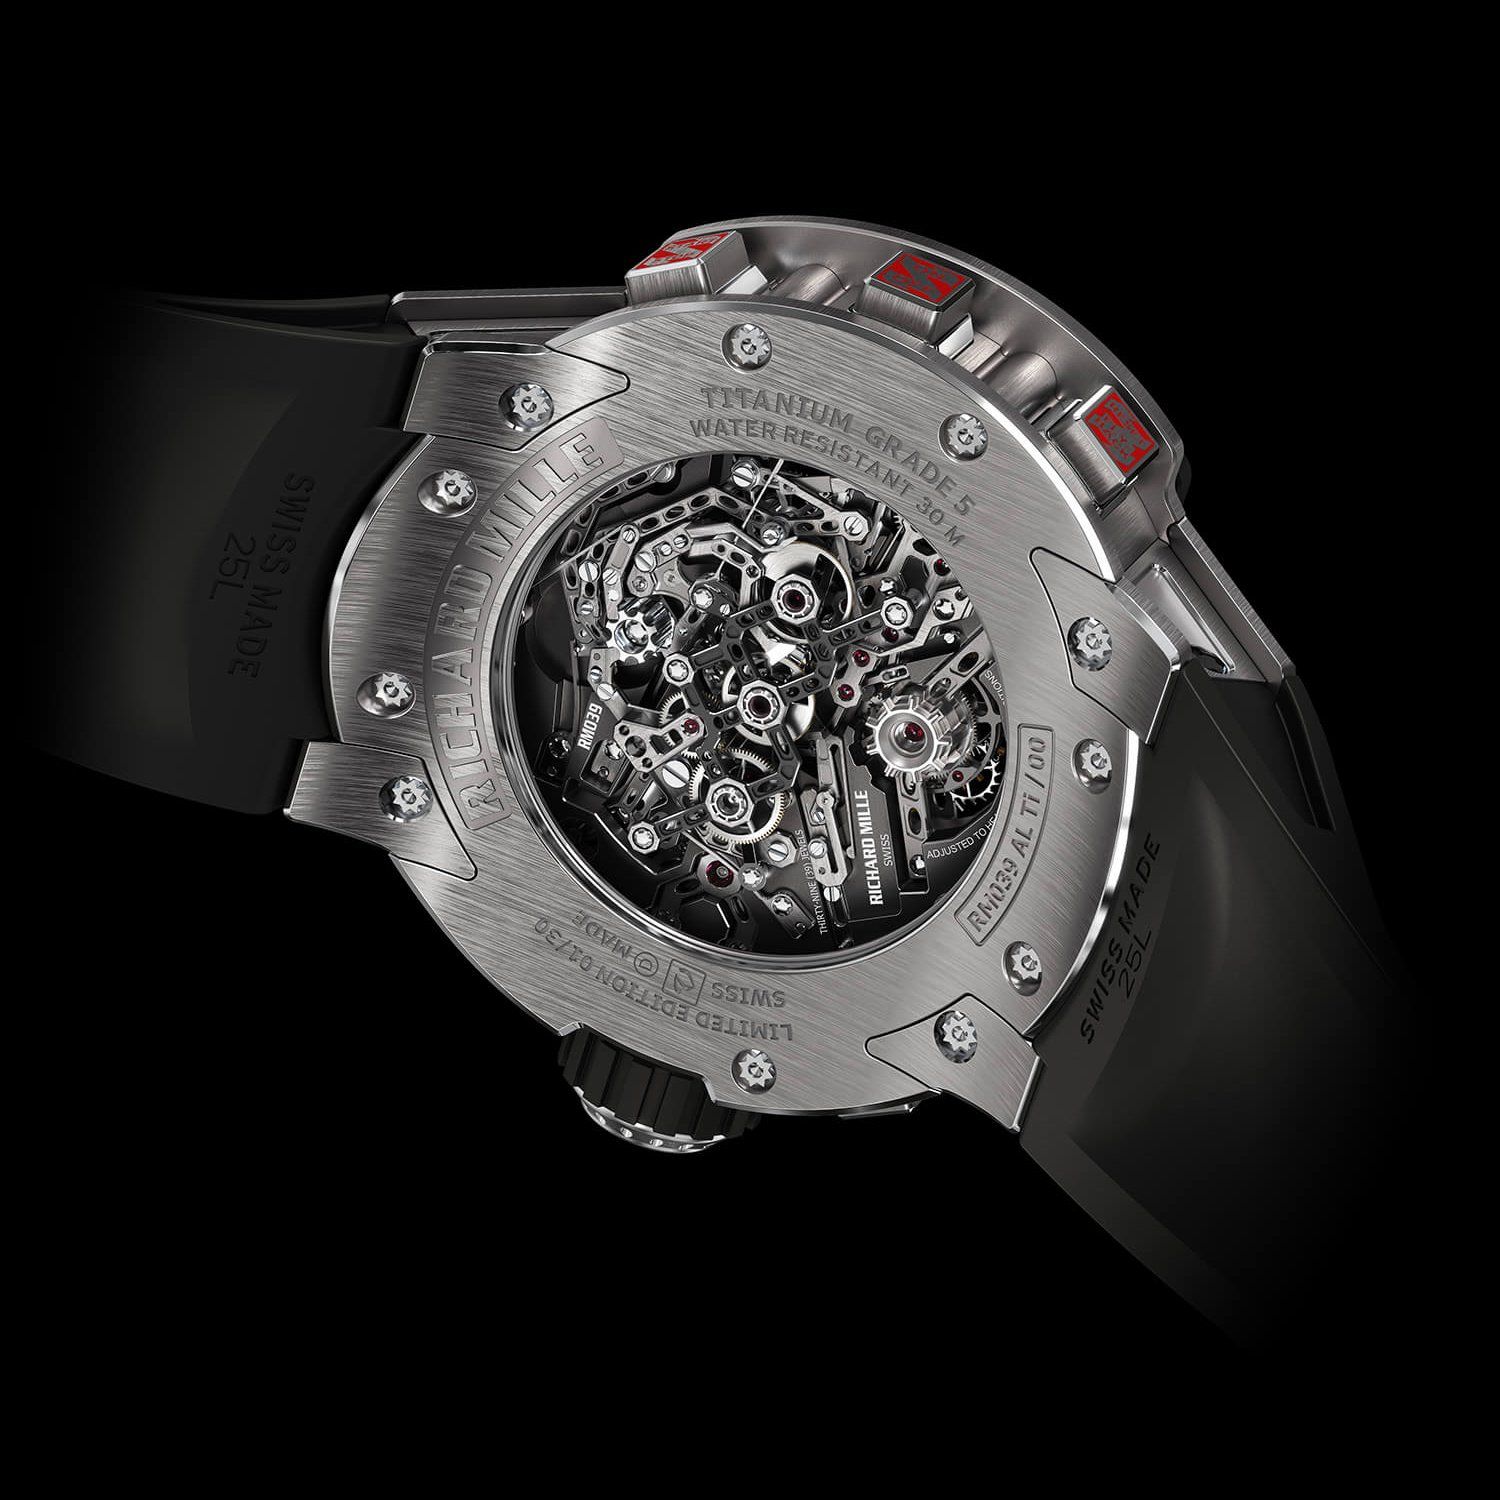 Richard Mille RM030 America’s Limited Edition Carbon NTPT RM30